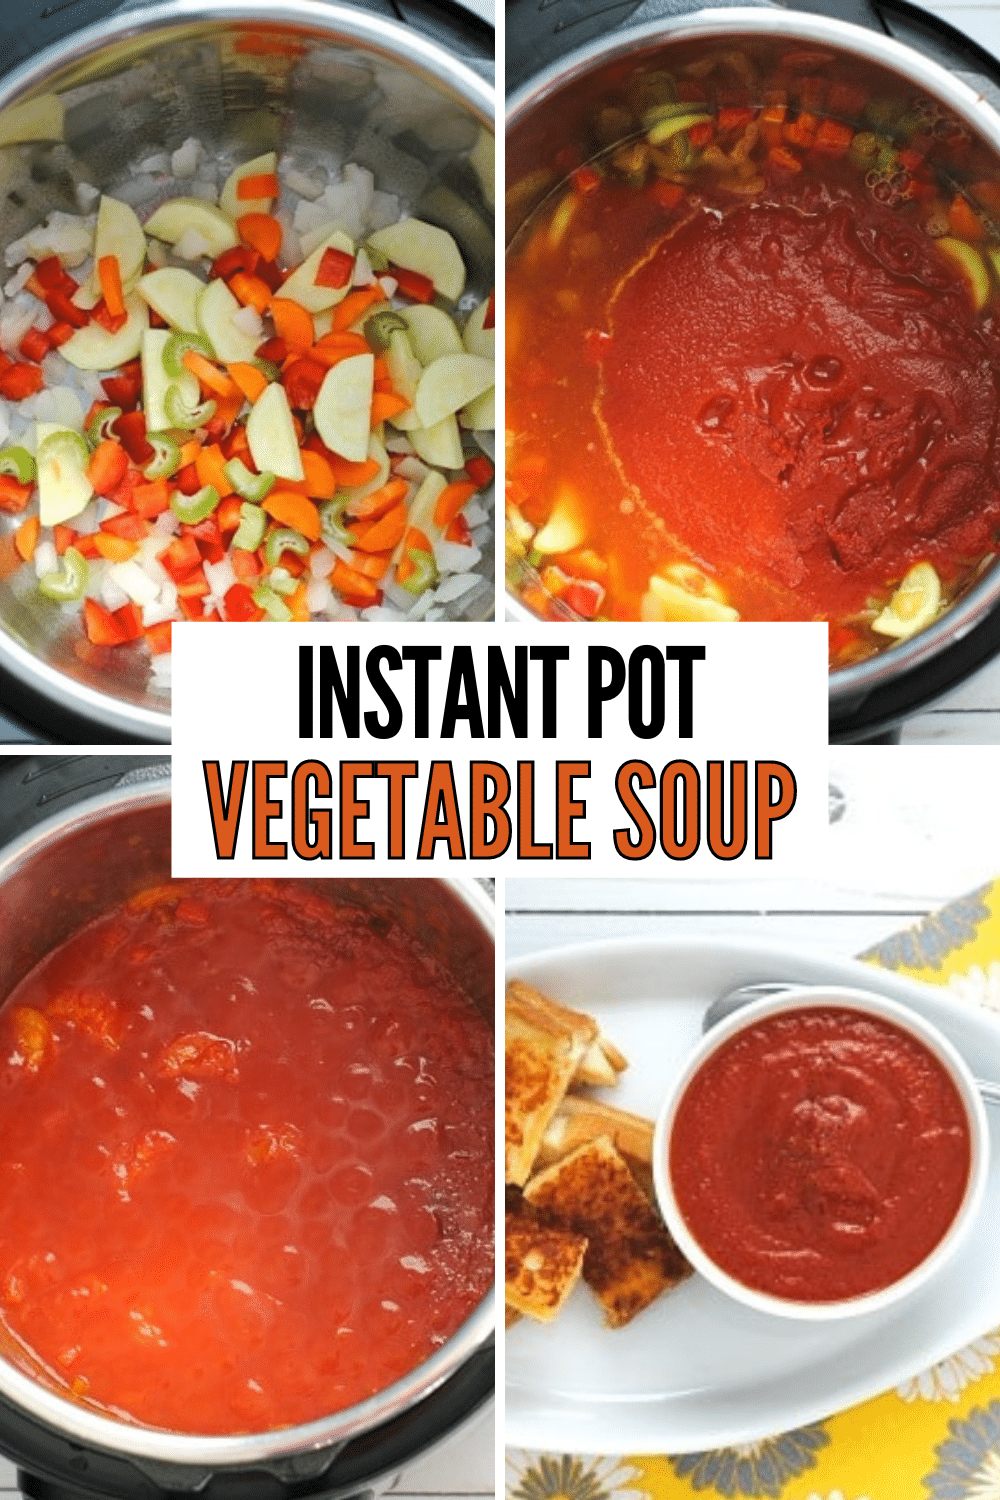 This Instant Pot Vegetable Soup is incredibly easy to make and it's absolutely delicious. Even better, it's really good for you too! #souprecipe #instantpot #pressurecooker #easydinner via @wondermomwannab